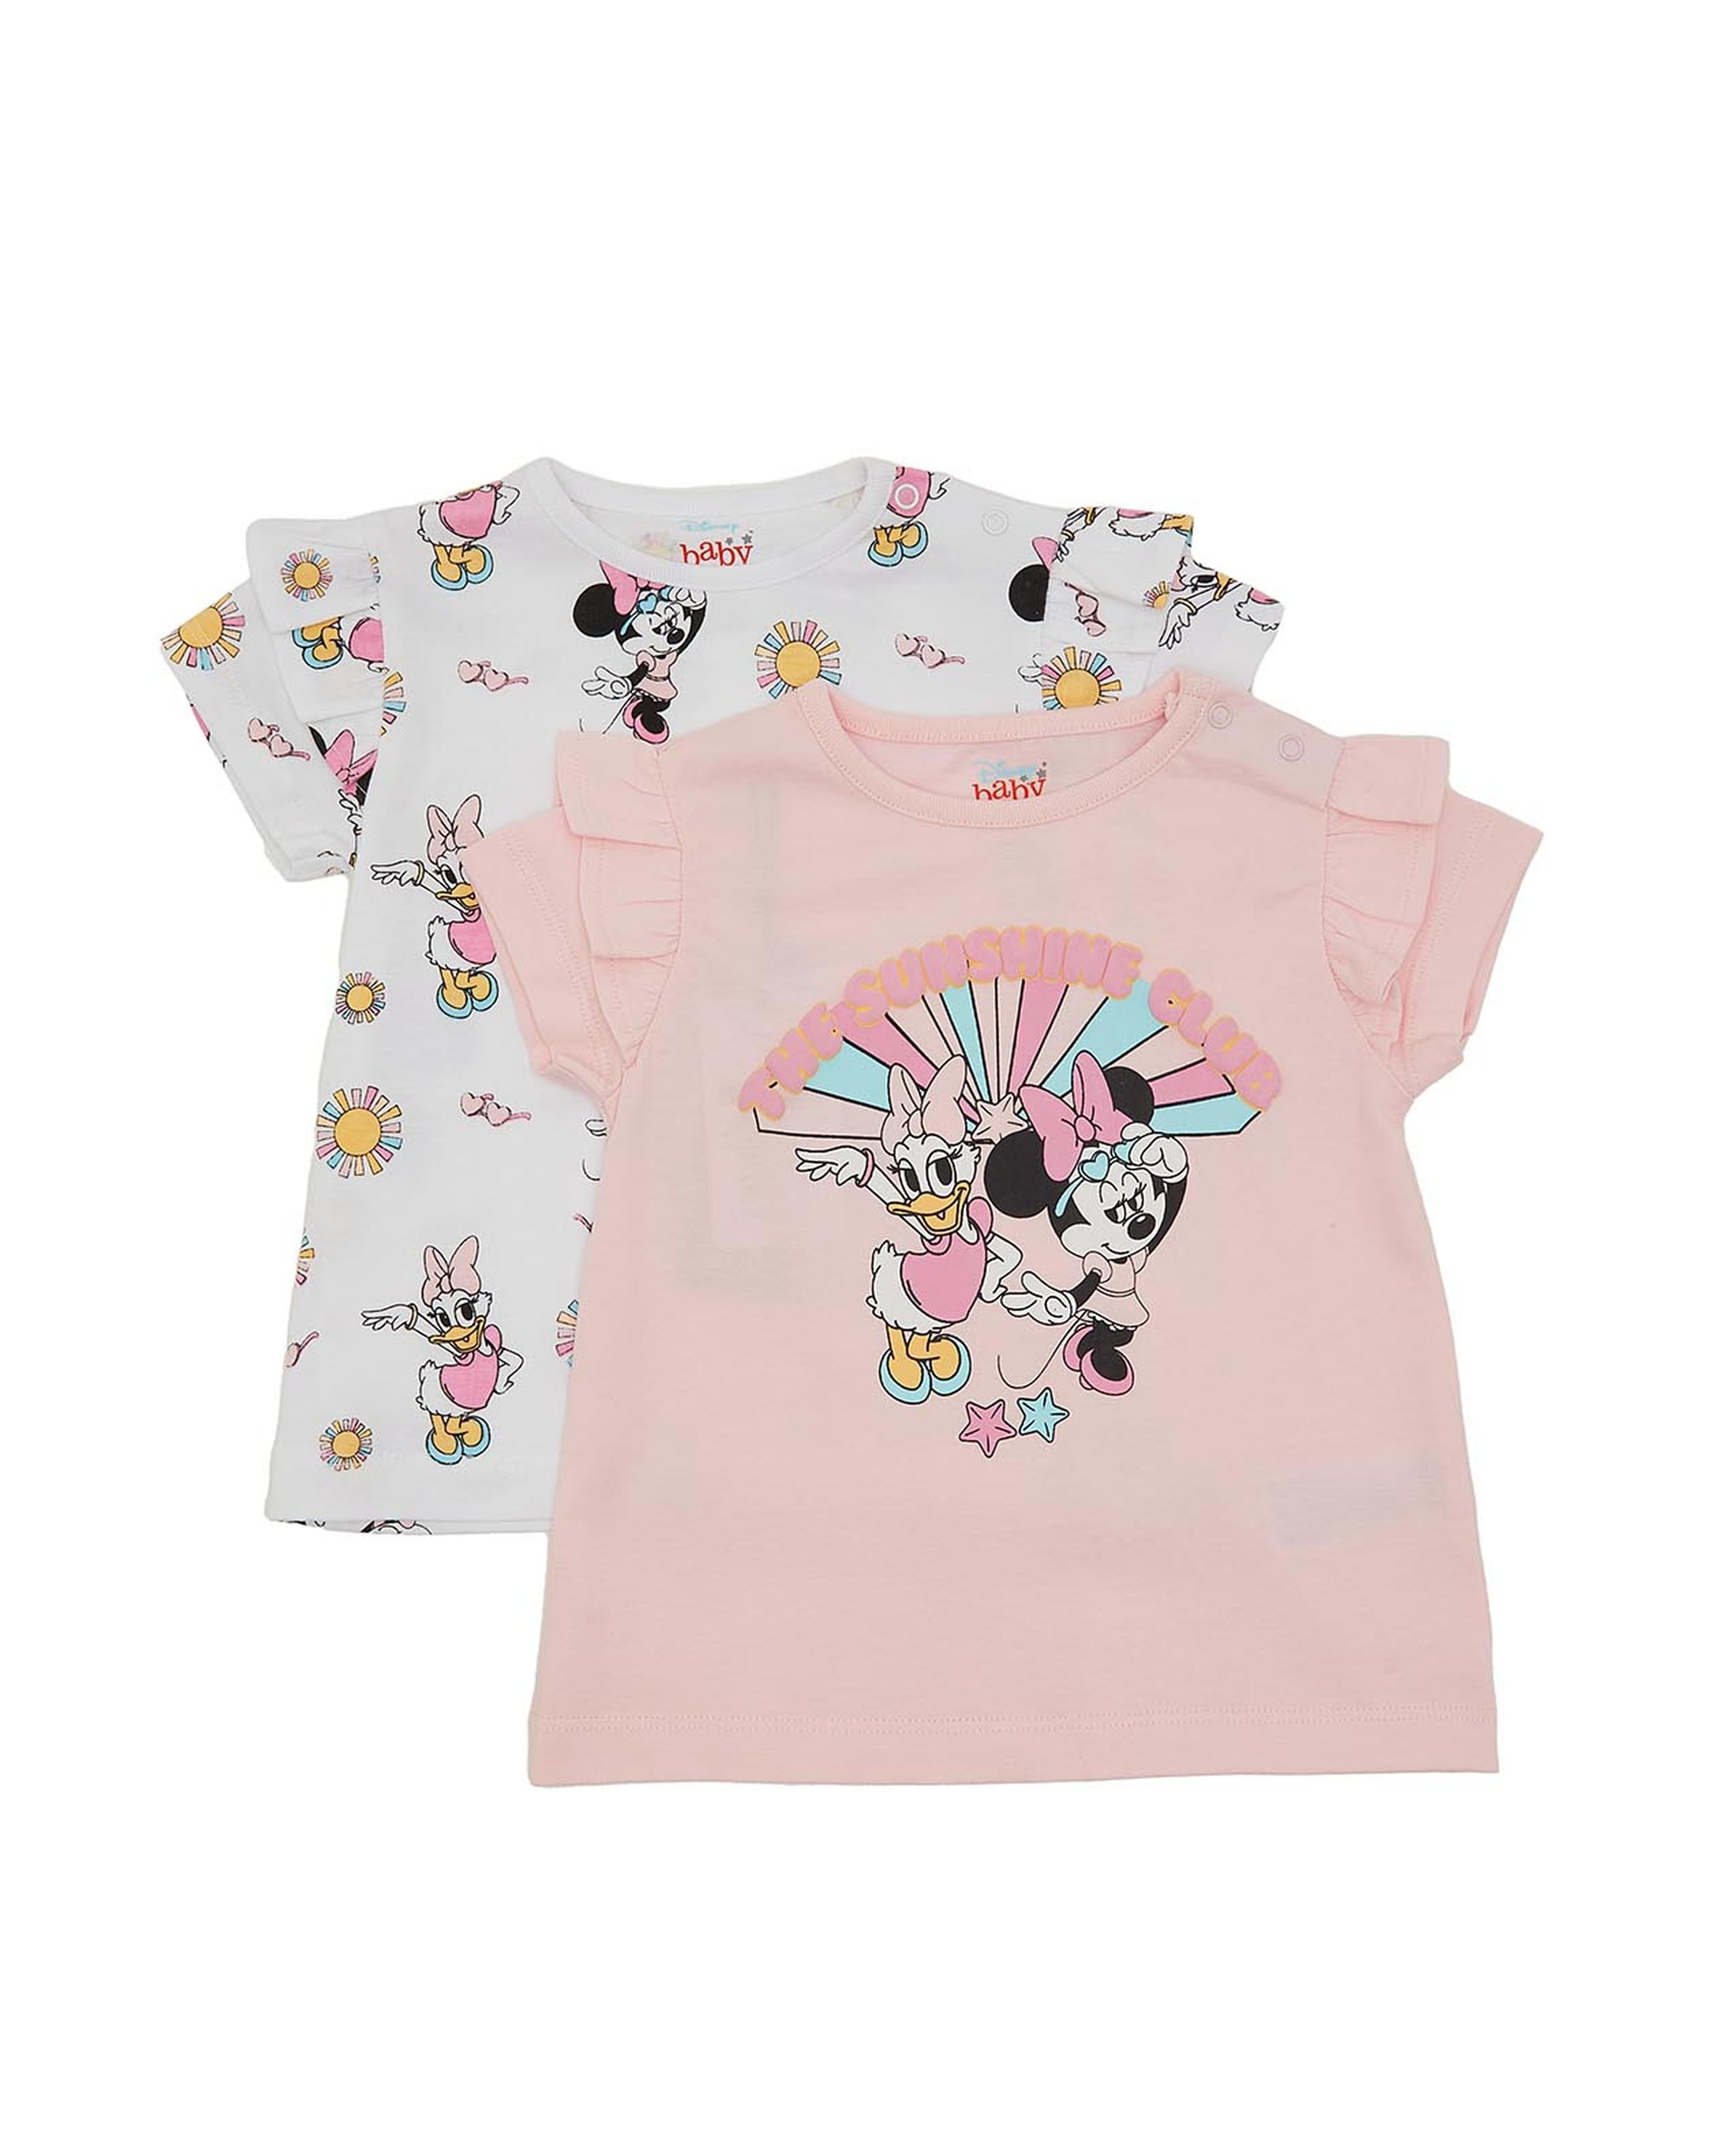 Pack of 2 Minnie Mouse Printed Tops with Short Sleeves